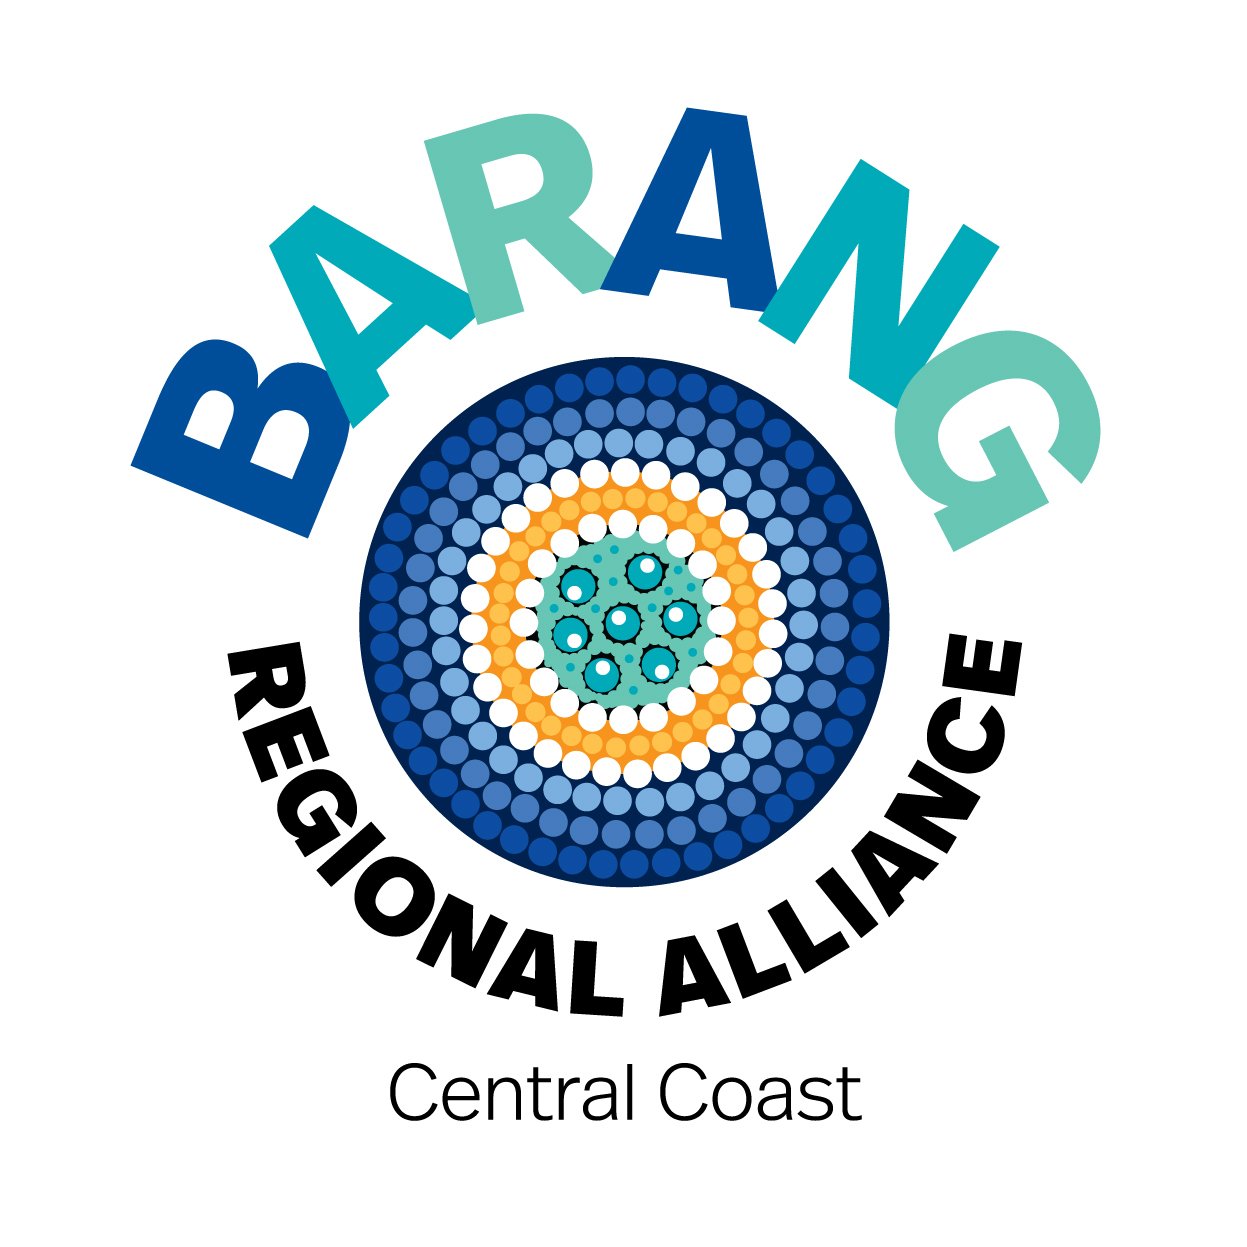 Barang Regional Alliance Ltd is a not-for-profit Aboriginal organisation supporting the empowerment of Aboriginal and Torres Strait Islander people on the CC.